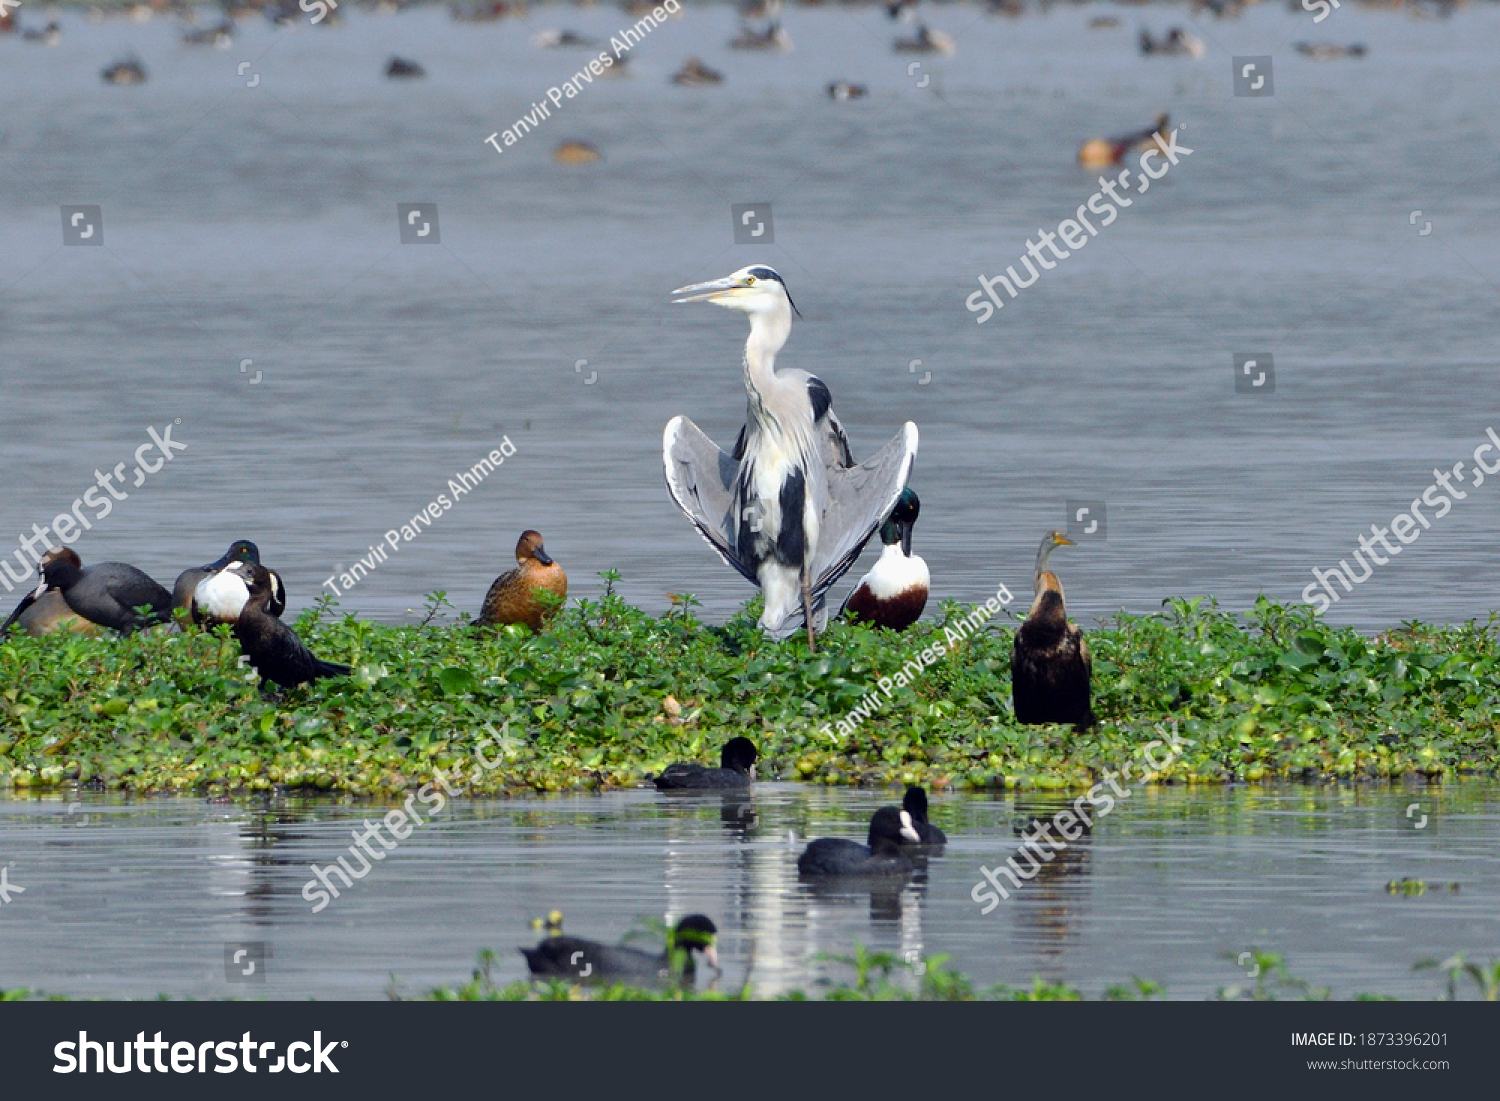 Seven Different Species Of Birds In One Frame #1873396201